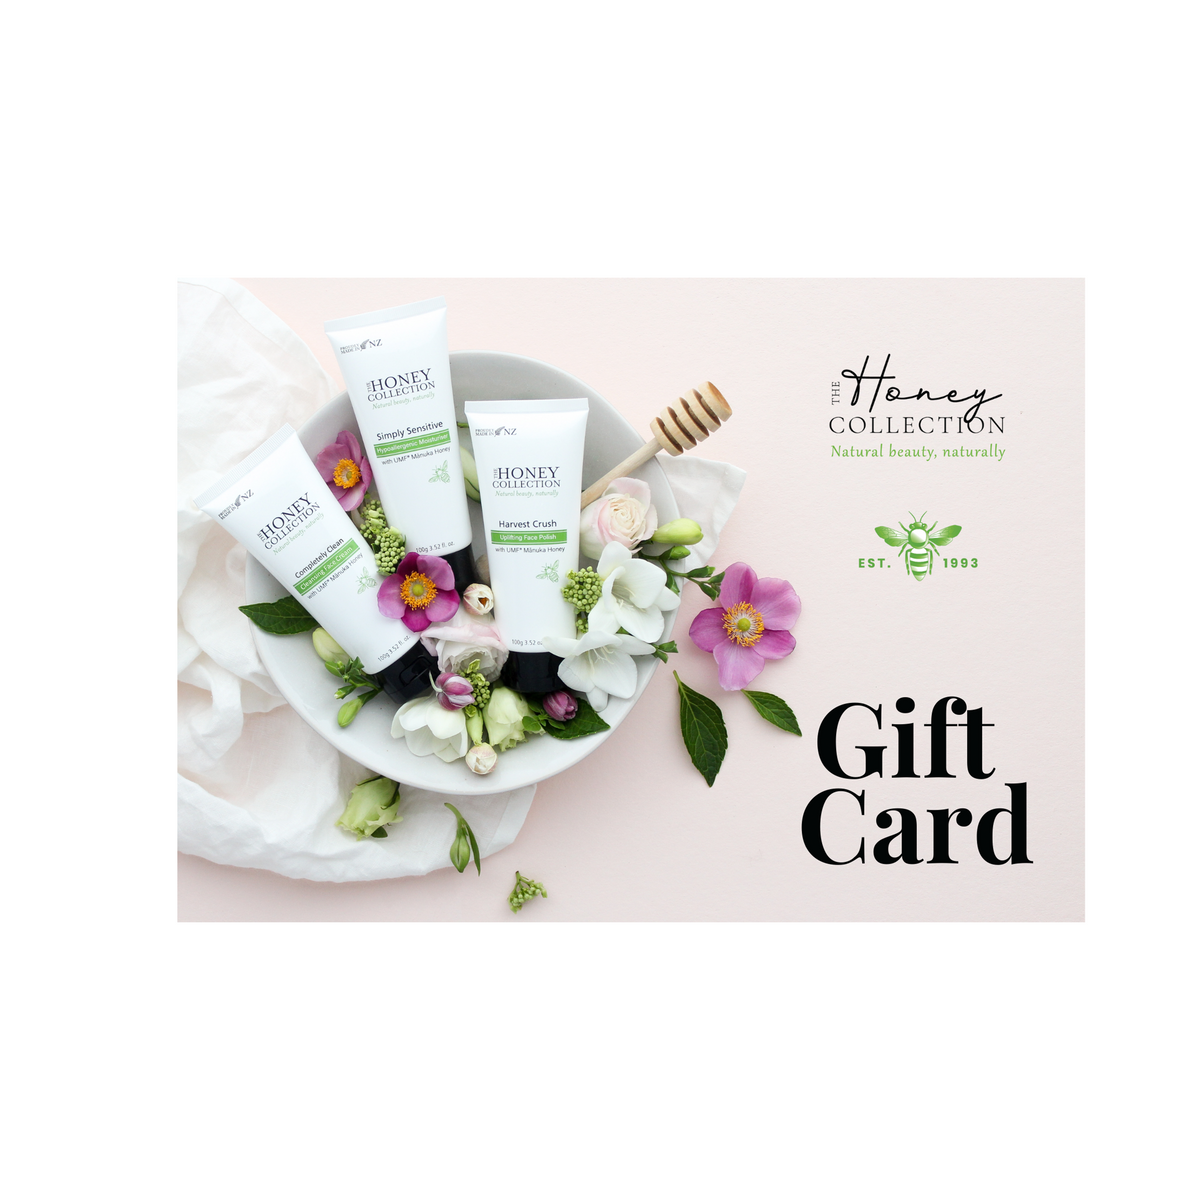 Gift Card - New Edition NZ